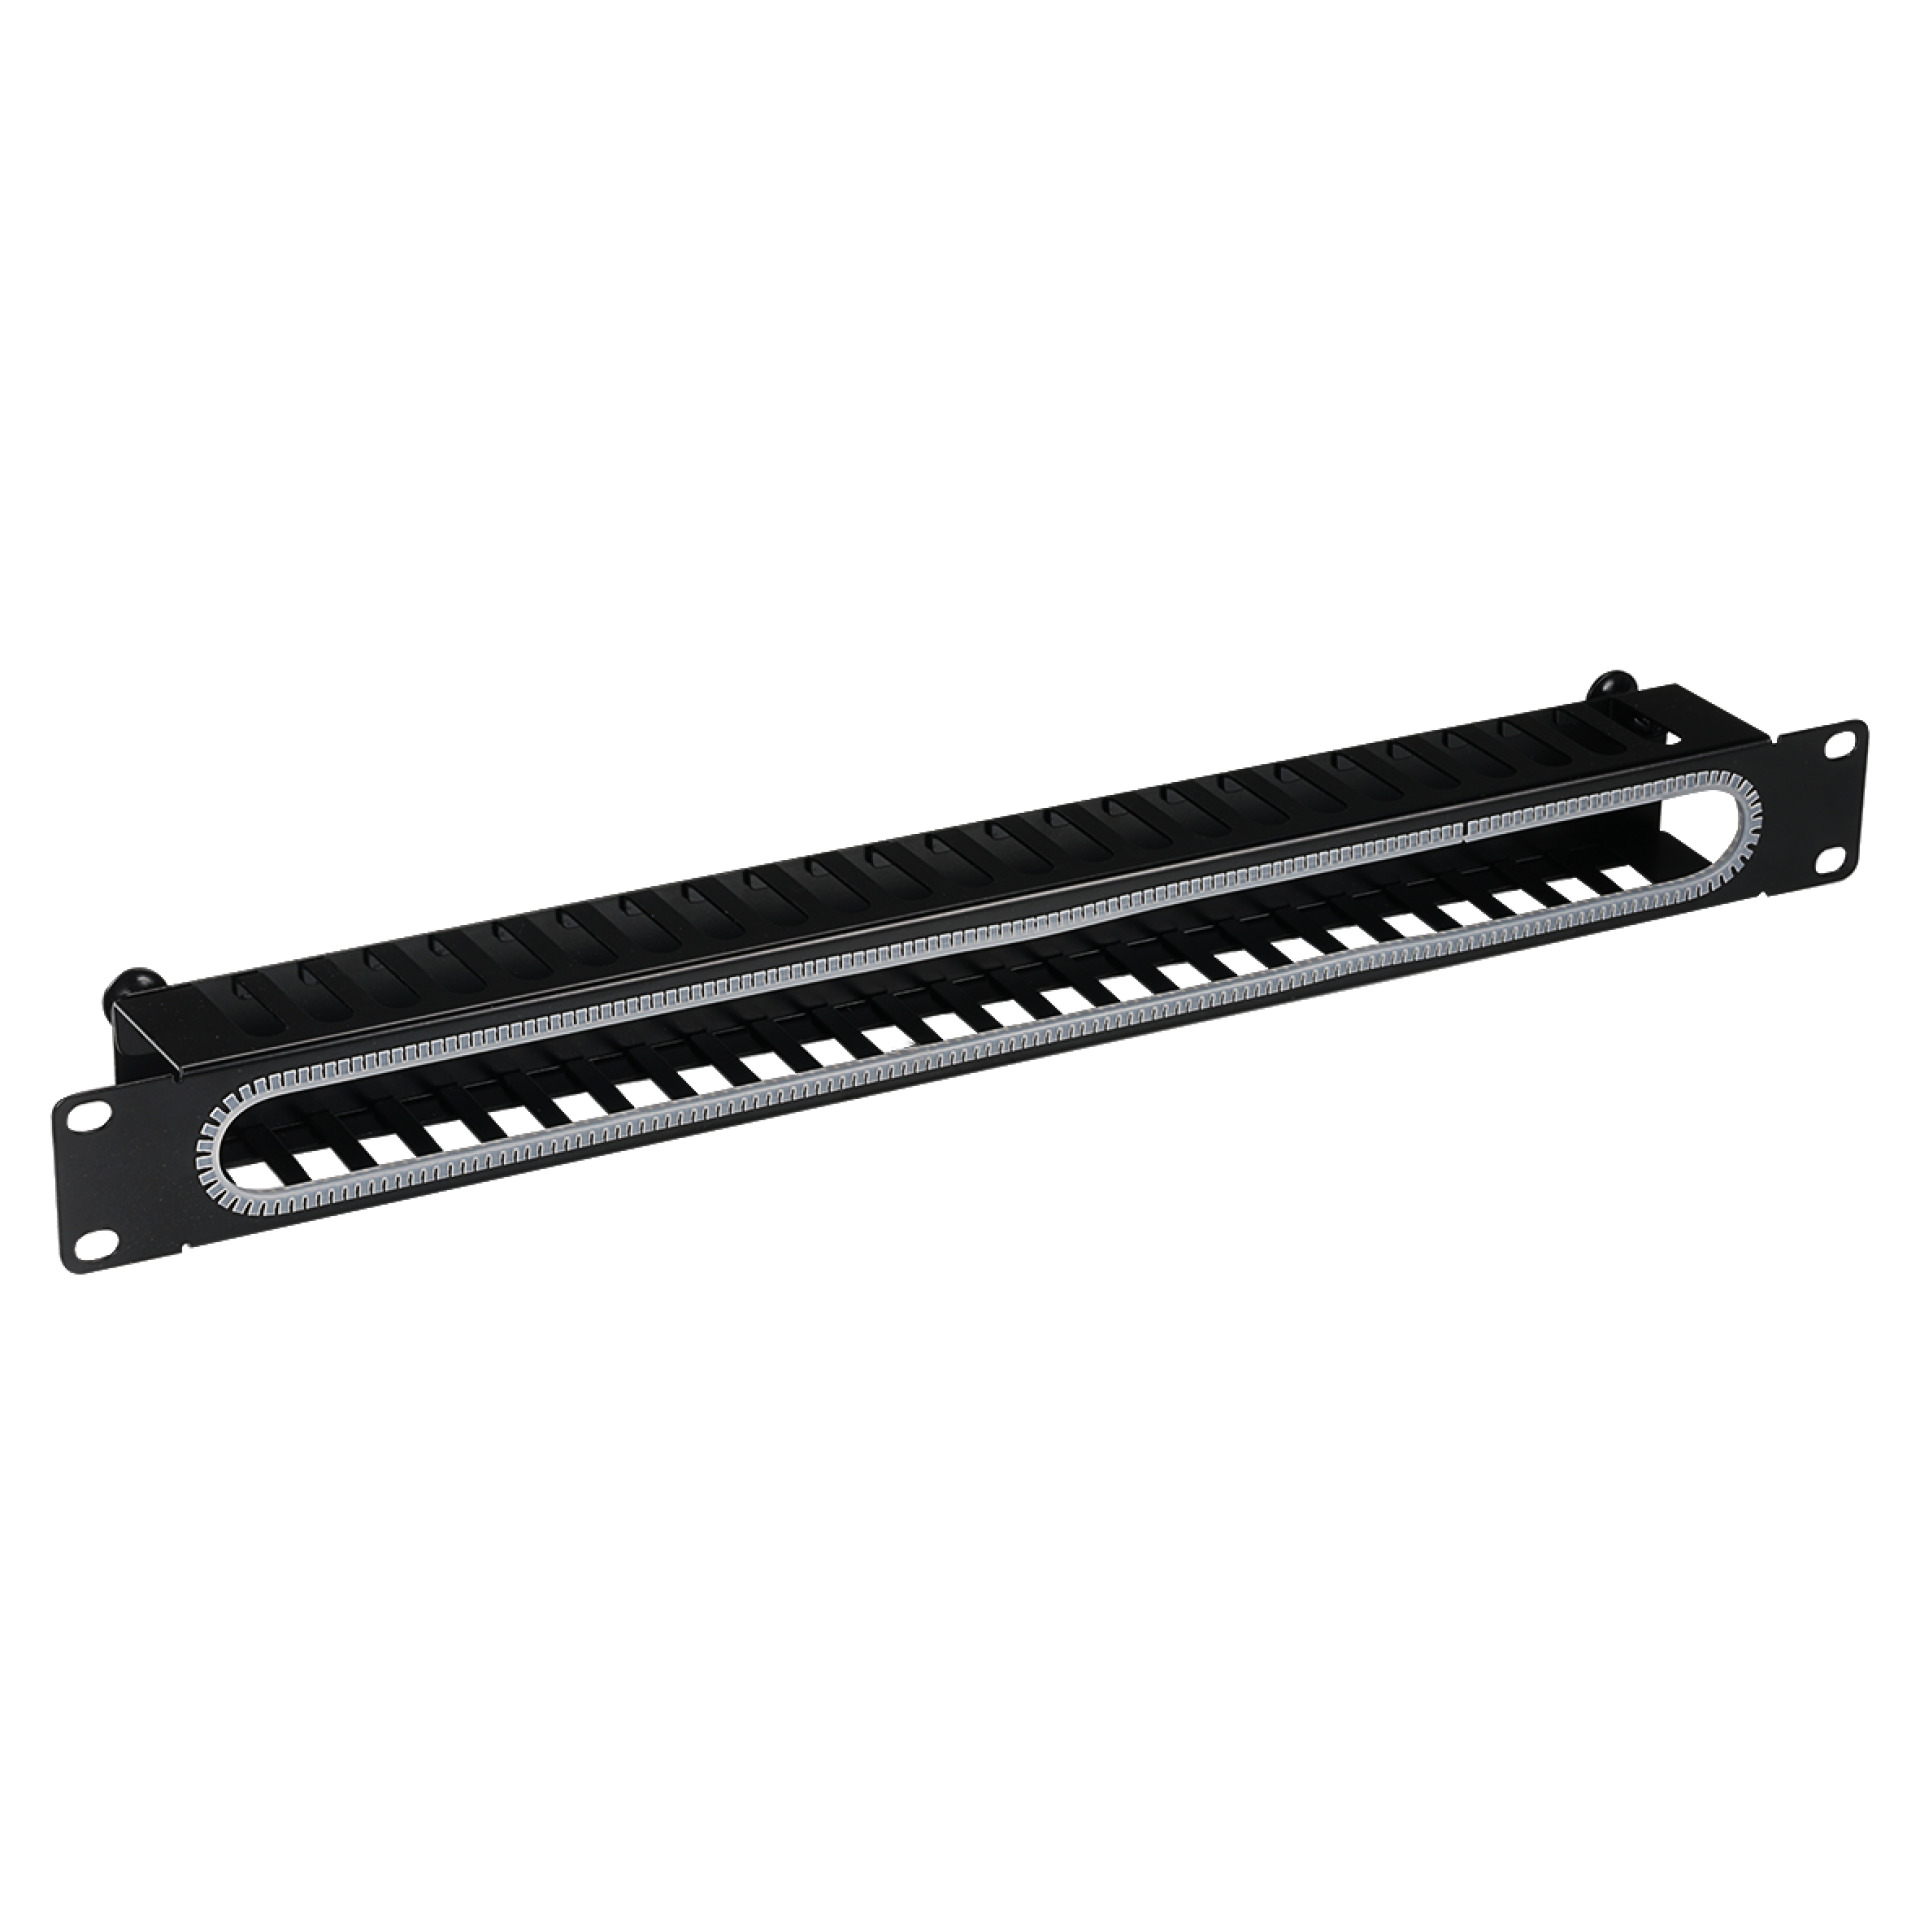 19" 1U Cable Routing Panel with Cover, RAL9005